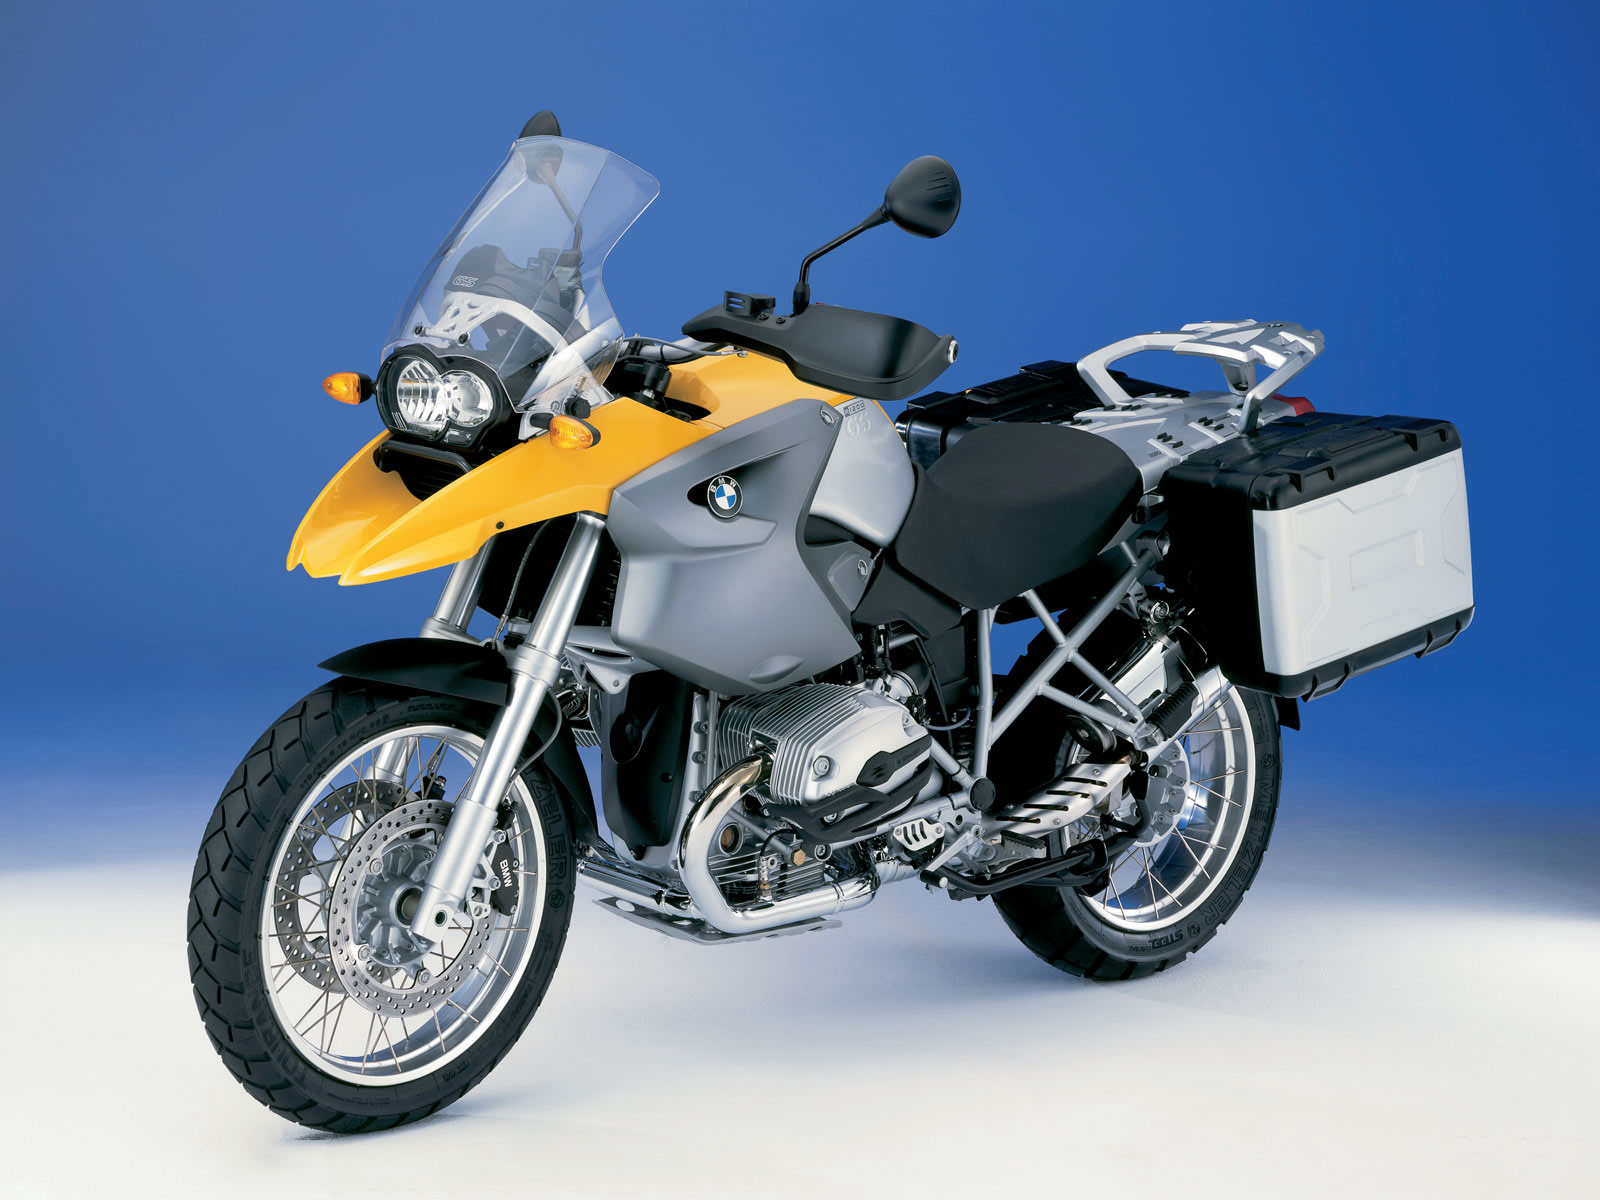 BMW R 1200 GS motorcycle desktop wallpaper. Accident lawyers info